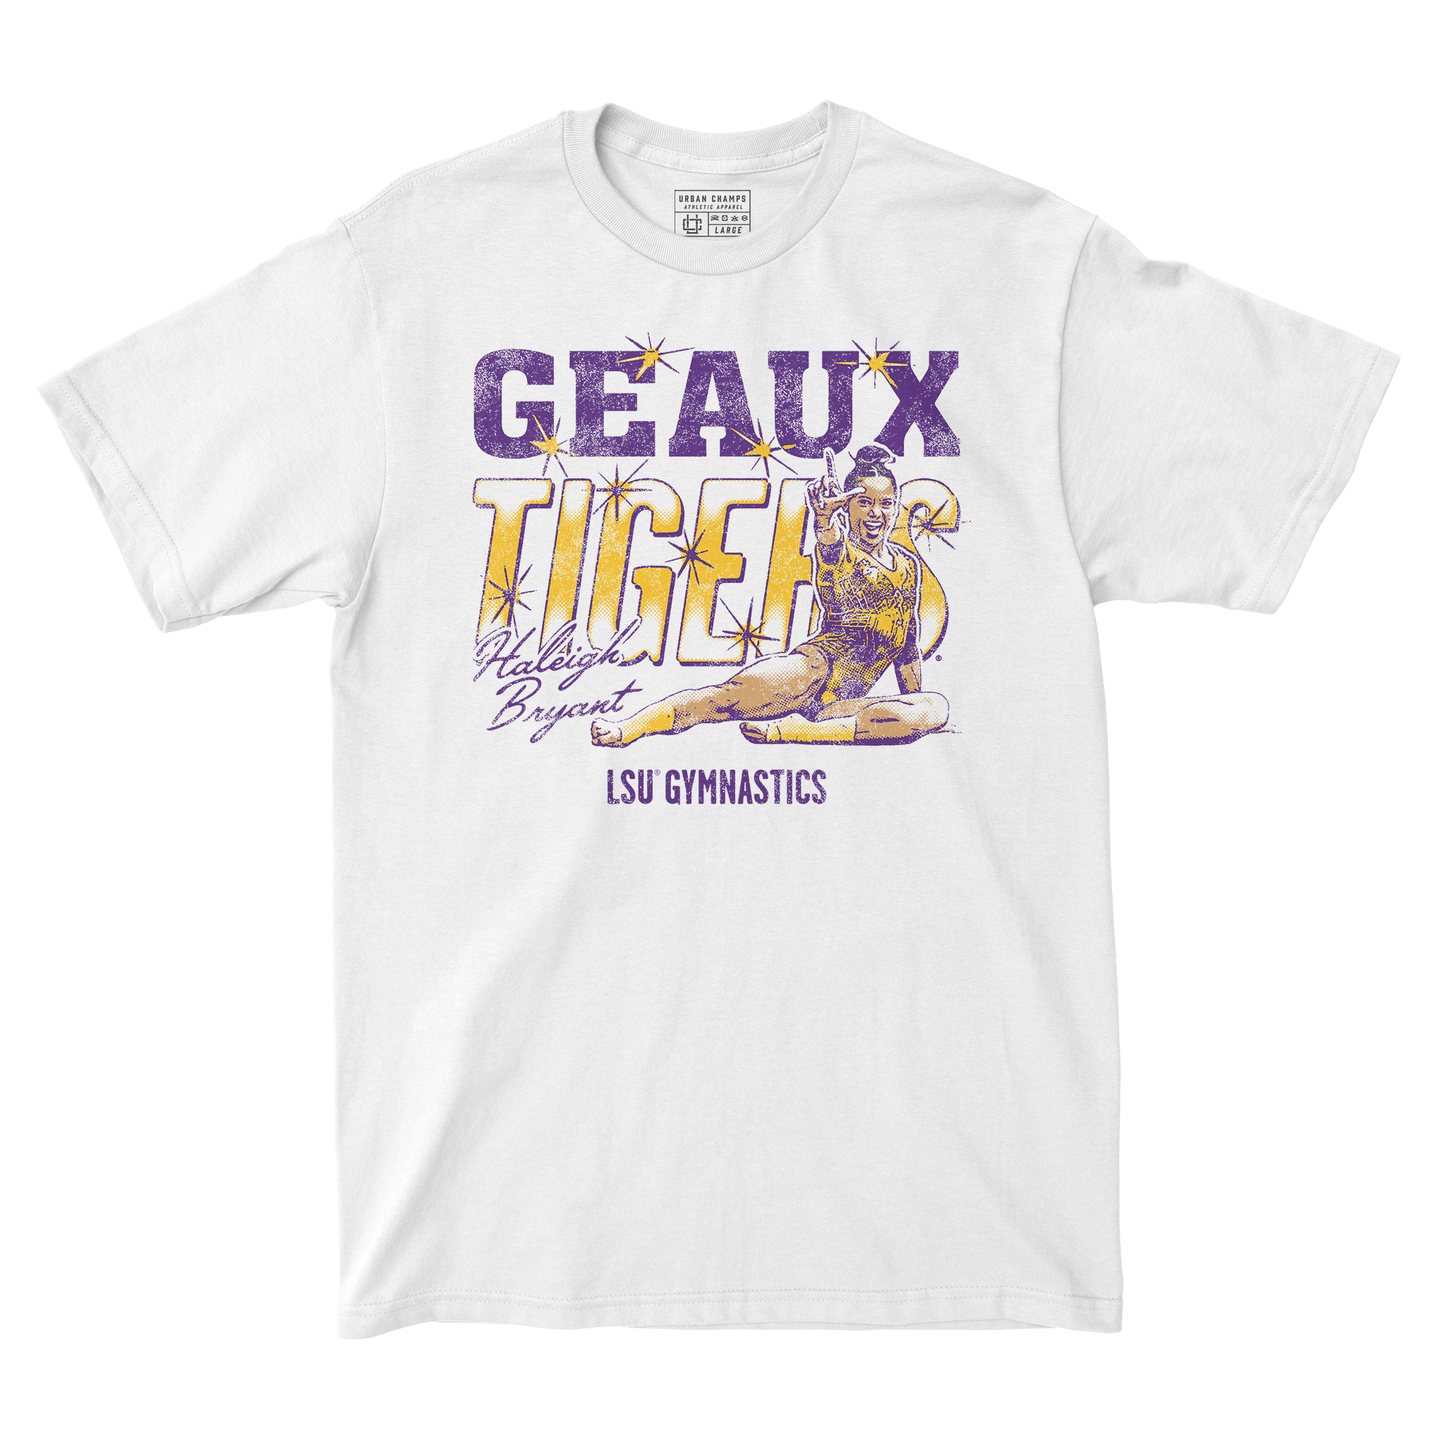 EXCLUSIVE RELEASE: Haleigh Bryant - Geaux Tigers White Tee